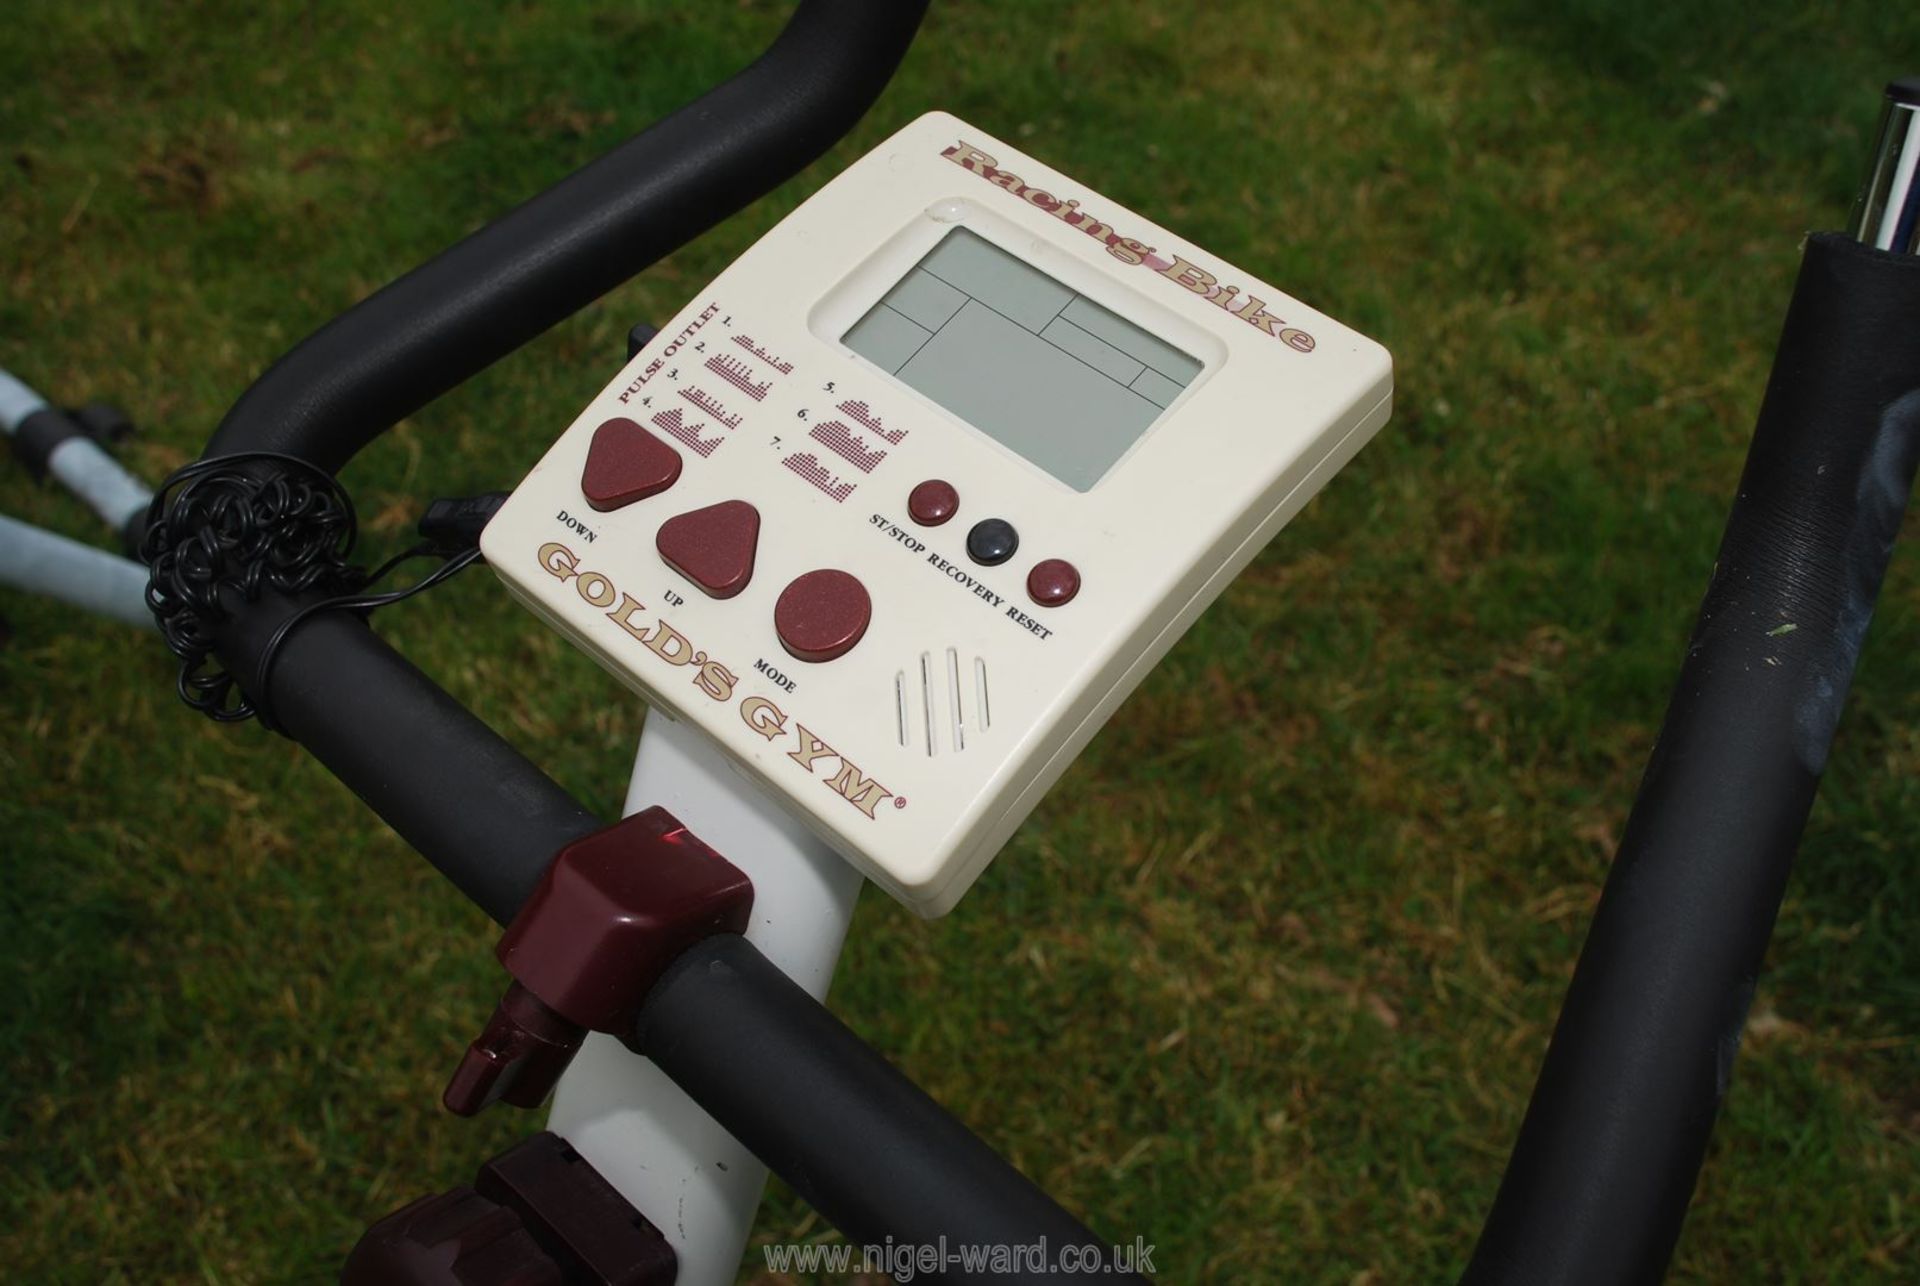 A "Gold Gym" exercise bike. - Image 2 of 2